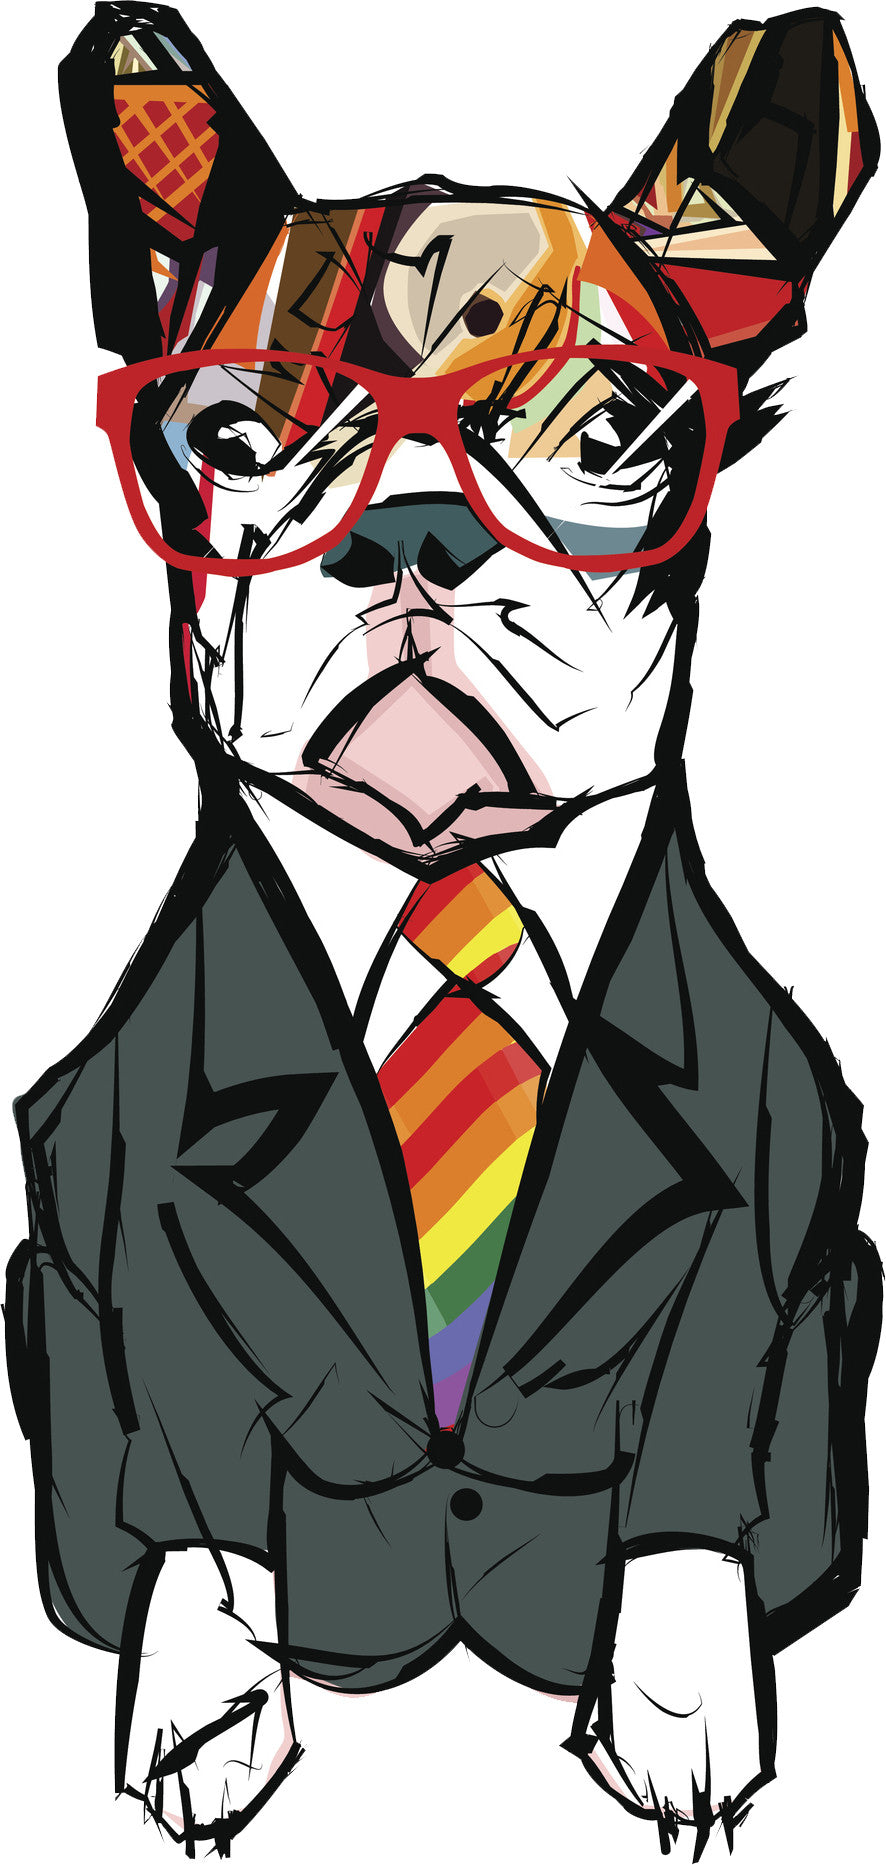 Adorable Abstract Rainbow Pride Tie Frenchie French Bulldog Pen Art Vinyl Decal Sticker